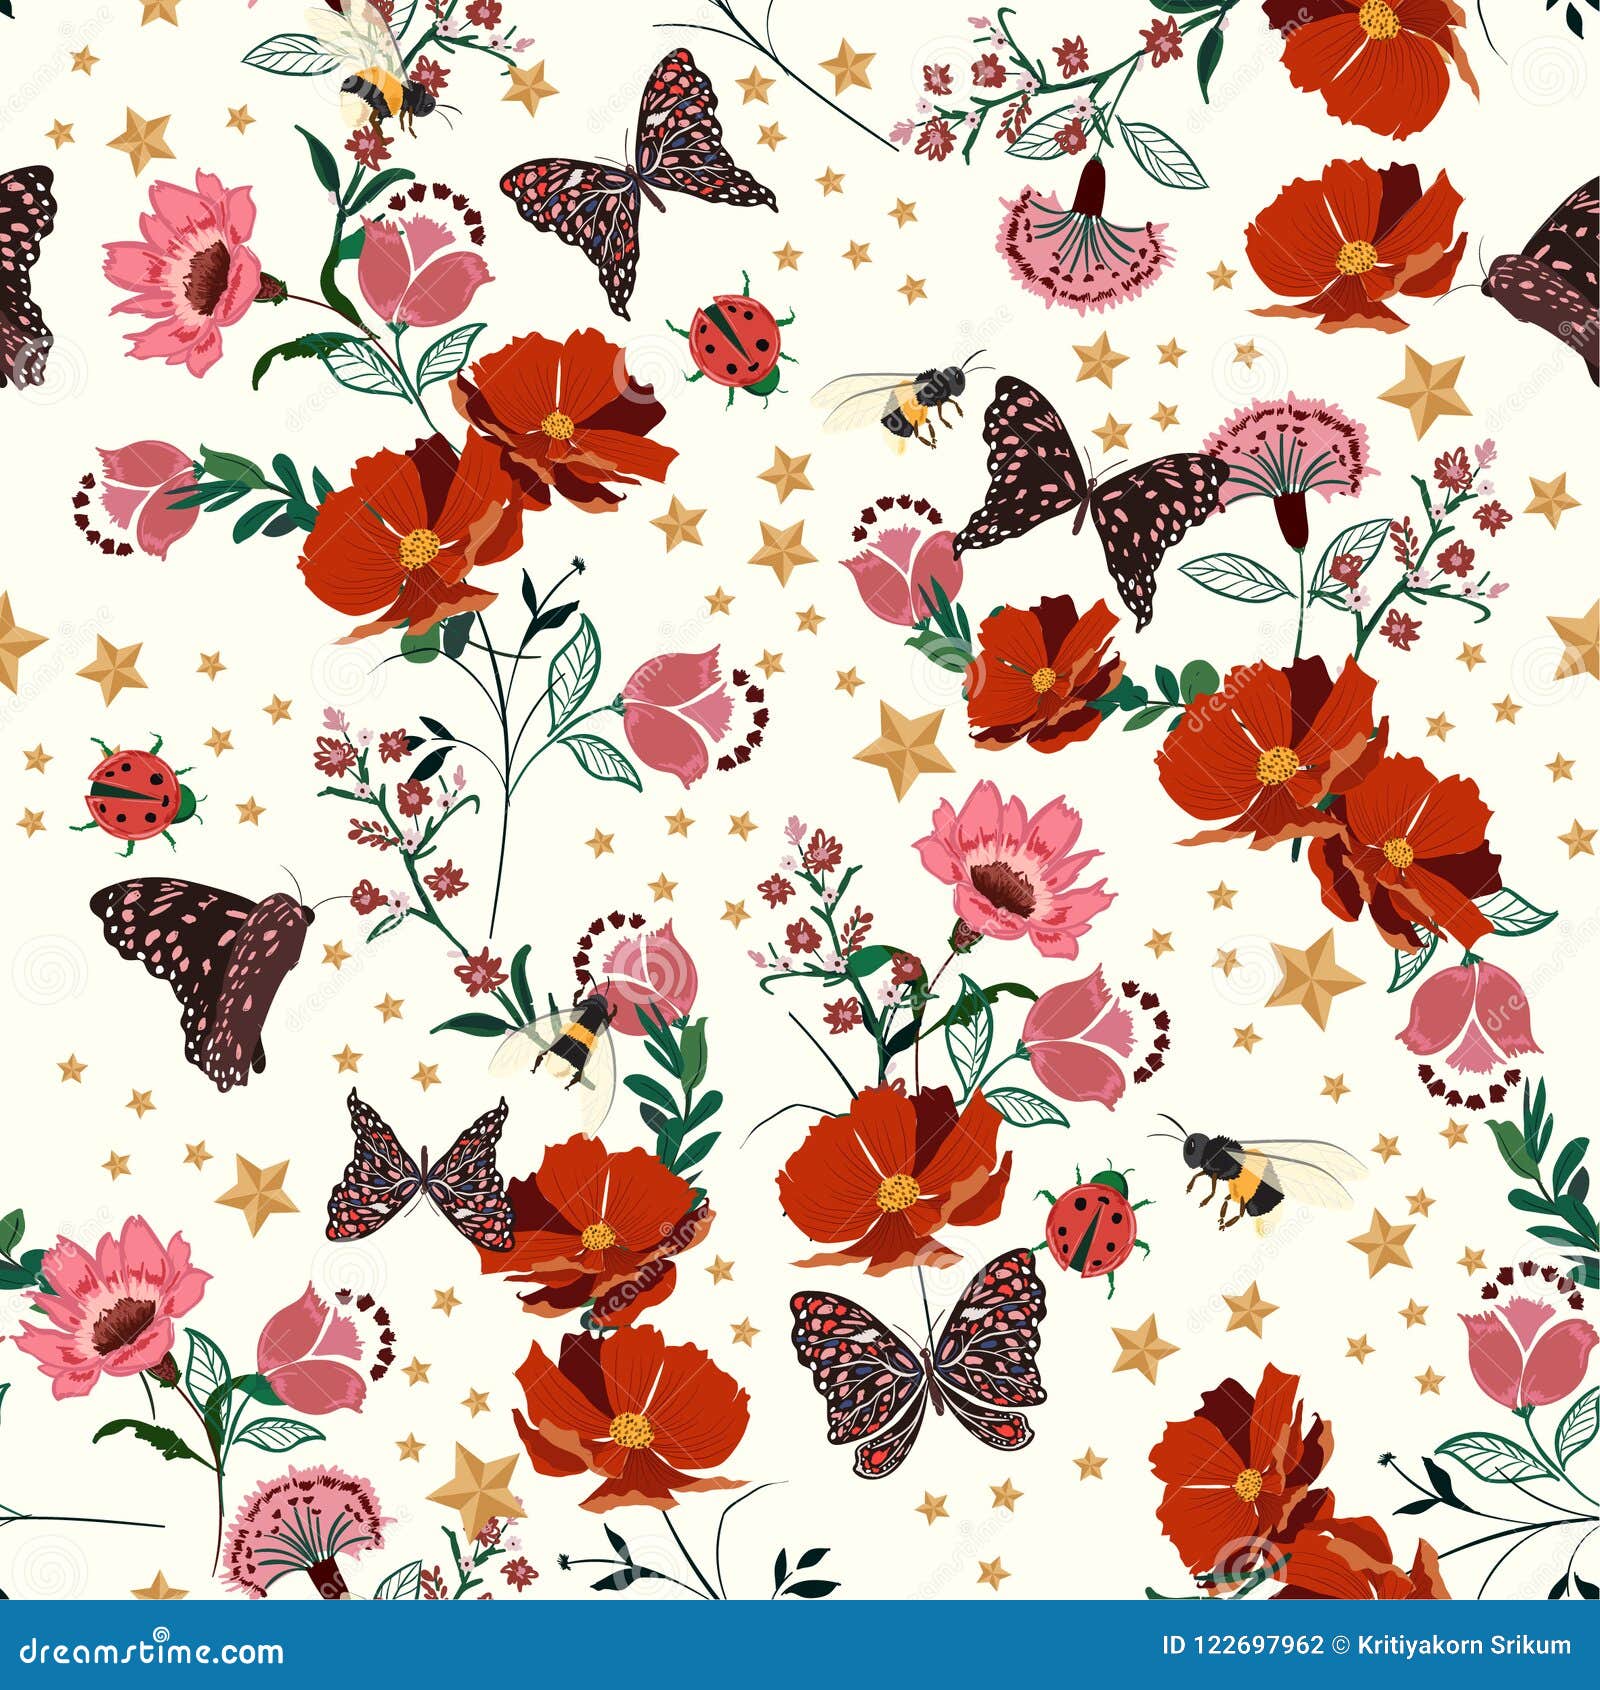 beautiful retro blooming flowers with insect,bees,butterfly,ladybug,with vintage stars seamless pattern  repeat for fashion